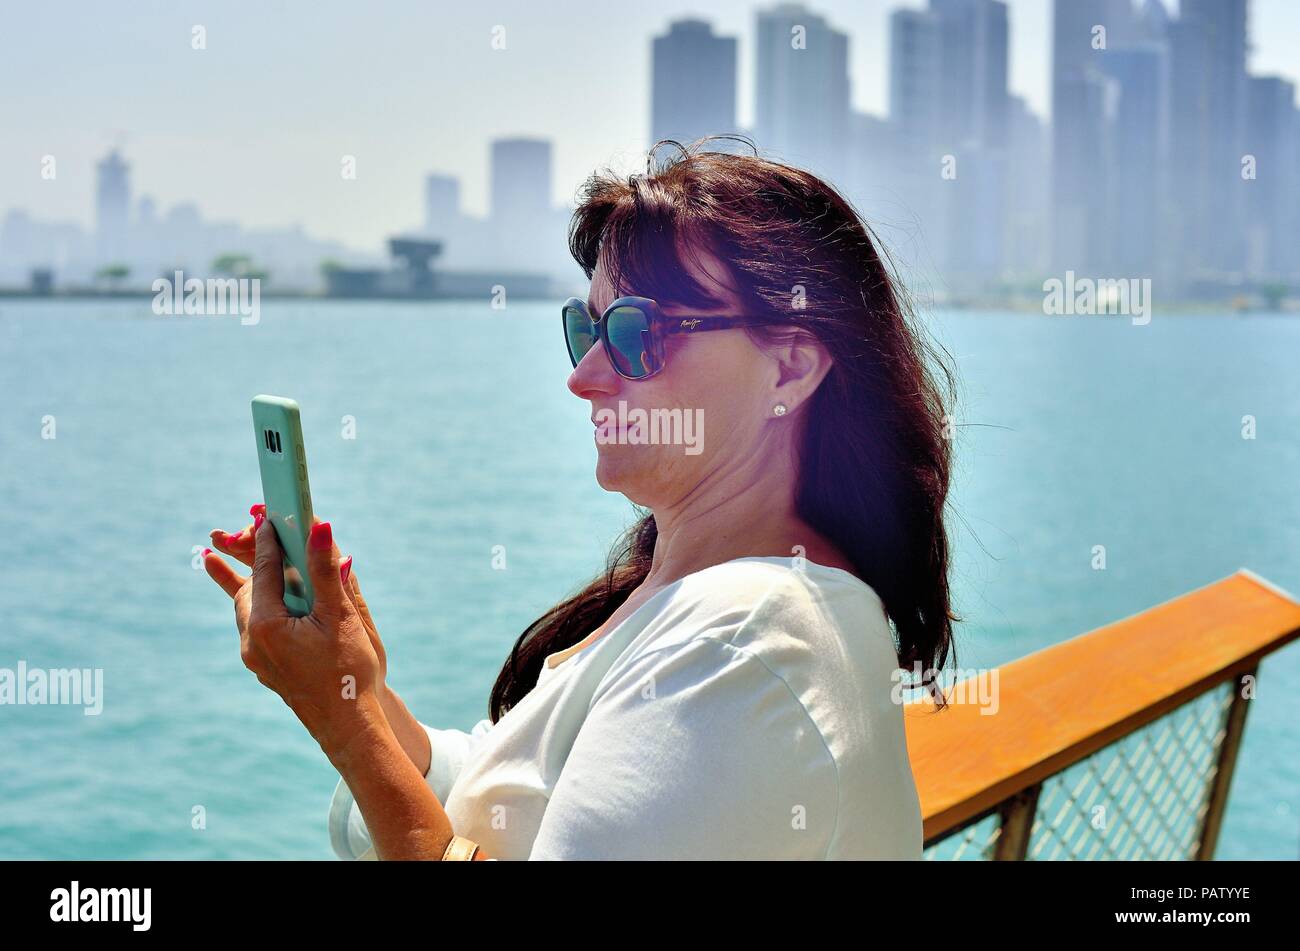 Chicago, Illinois, USA. Woman accessing her cell phone to text while at Navy Pier. Stock Photo